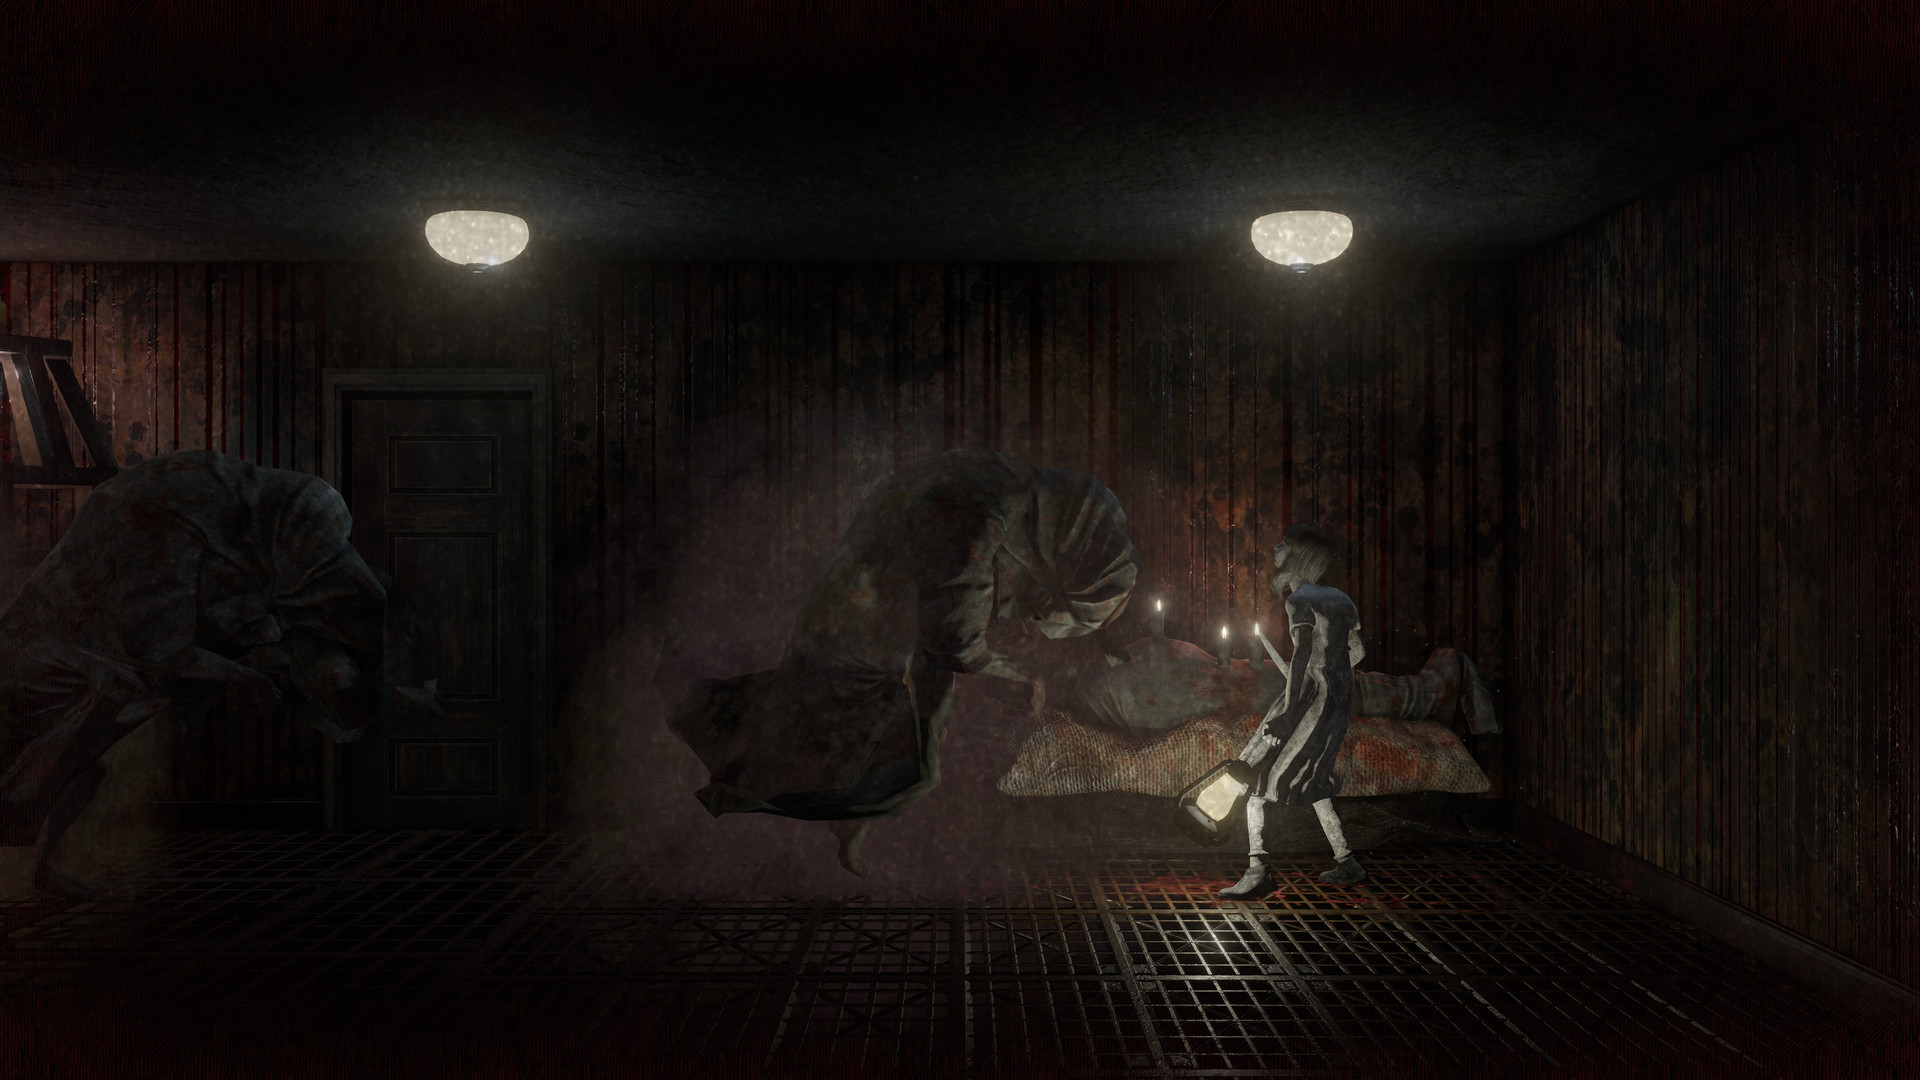 Withering Rooms Free Download